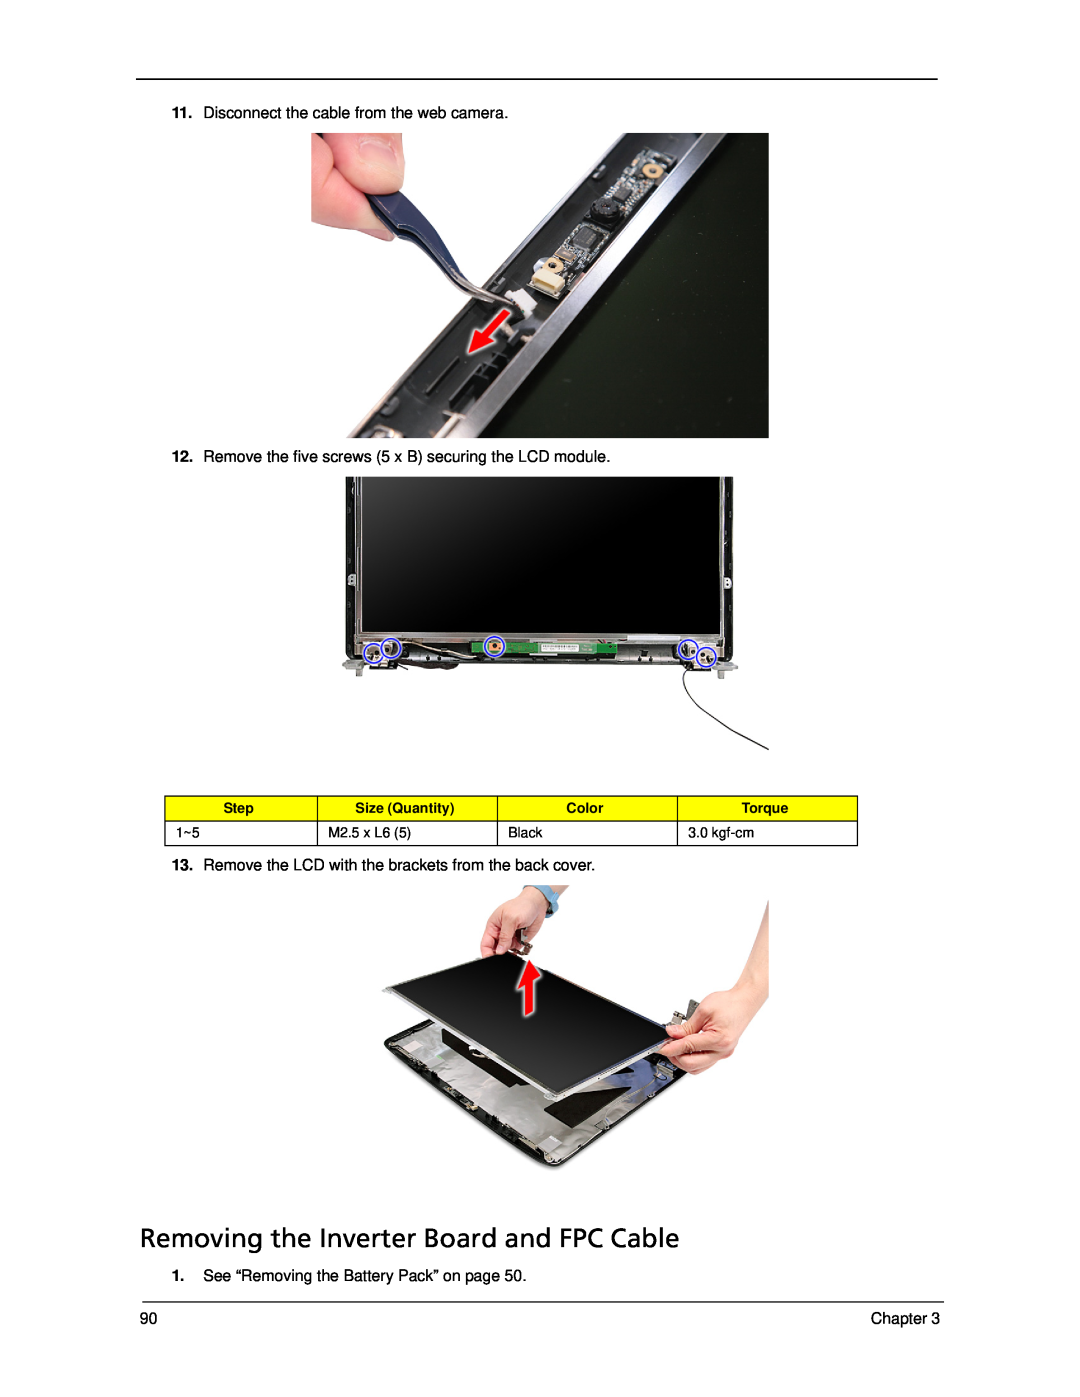 Acer 5330 manual Removing the Inverter Board and FPC Cable, Step, Size Quantity, Color, Torque 